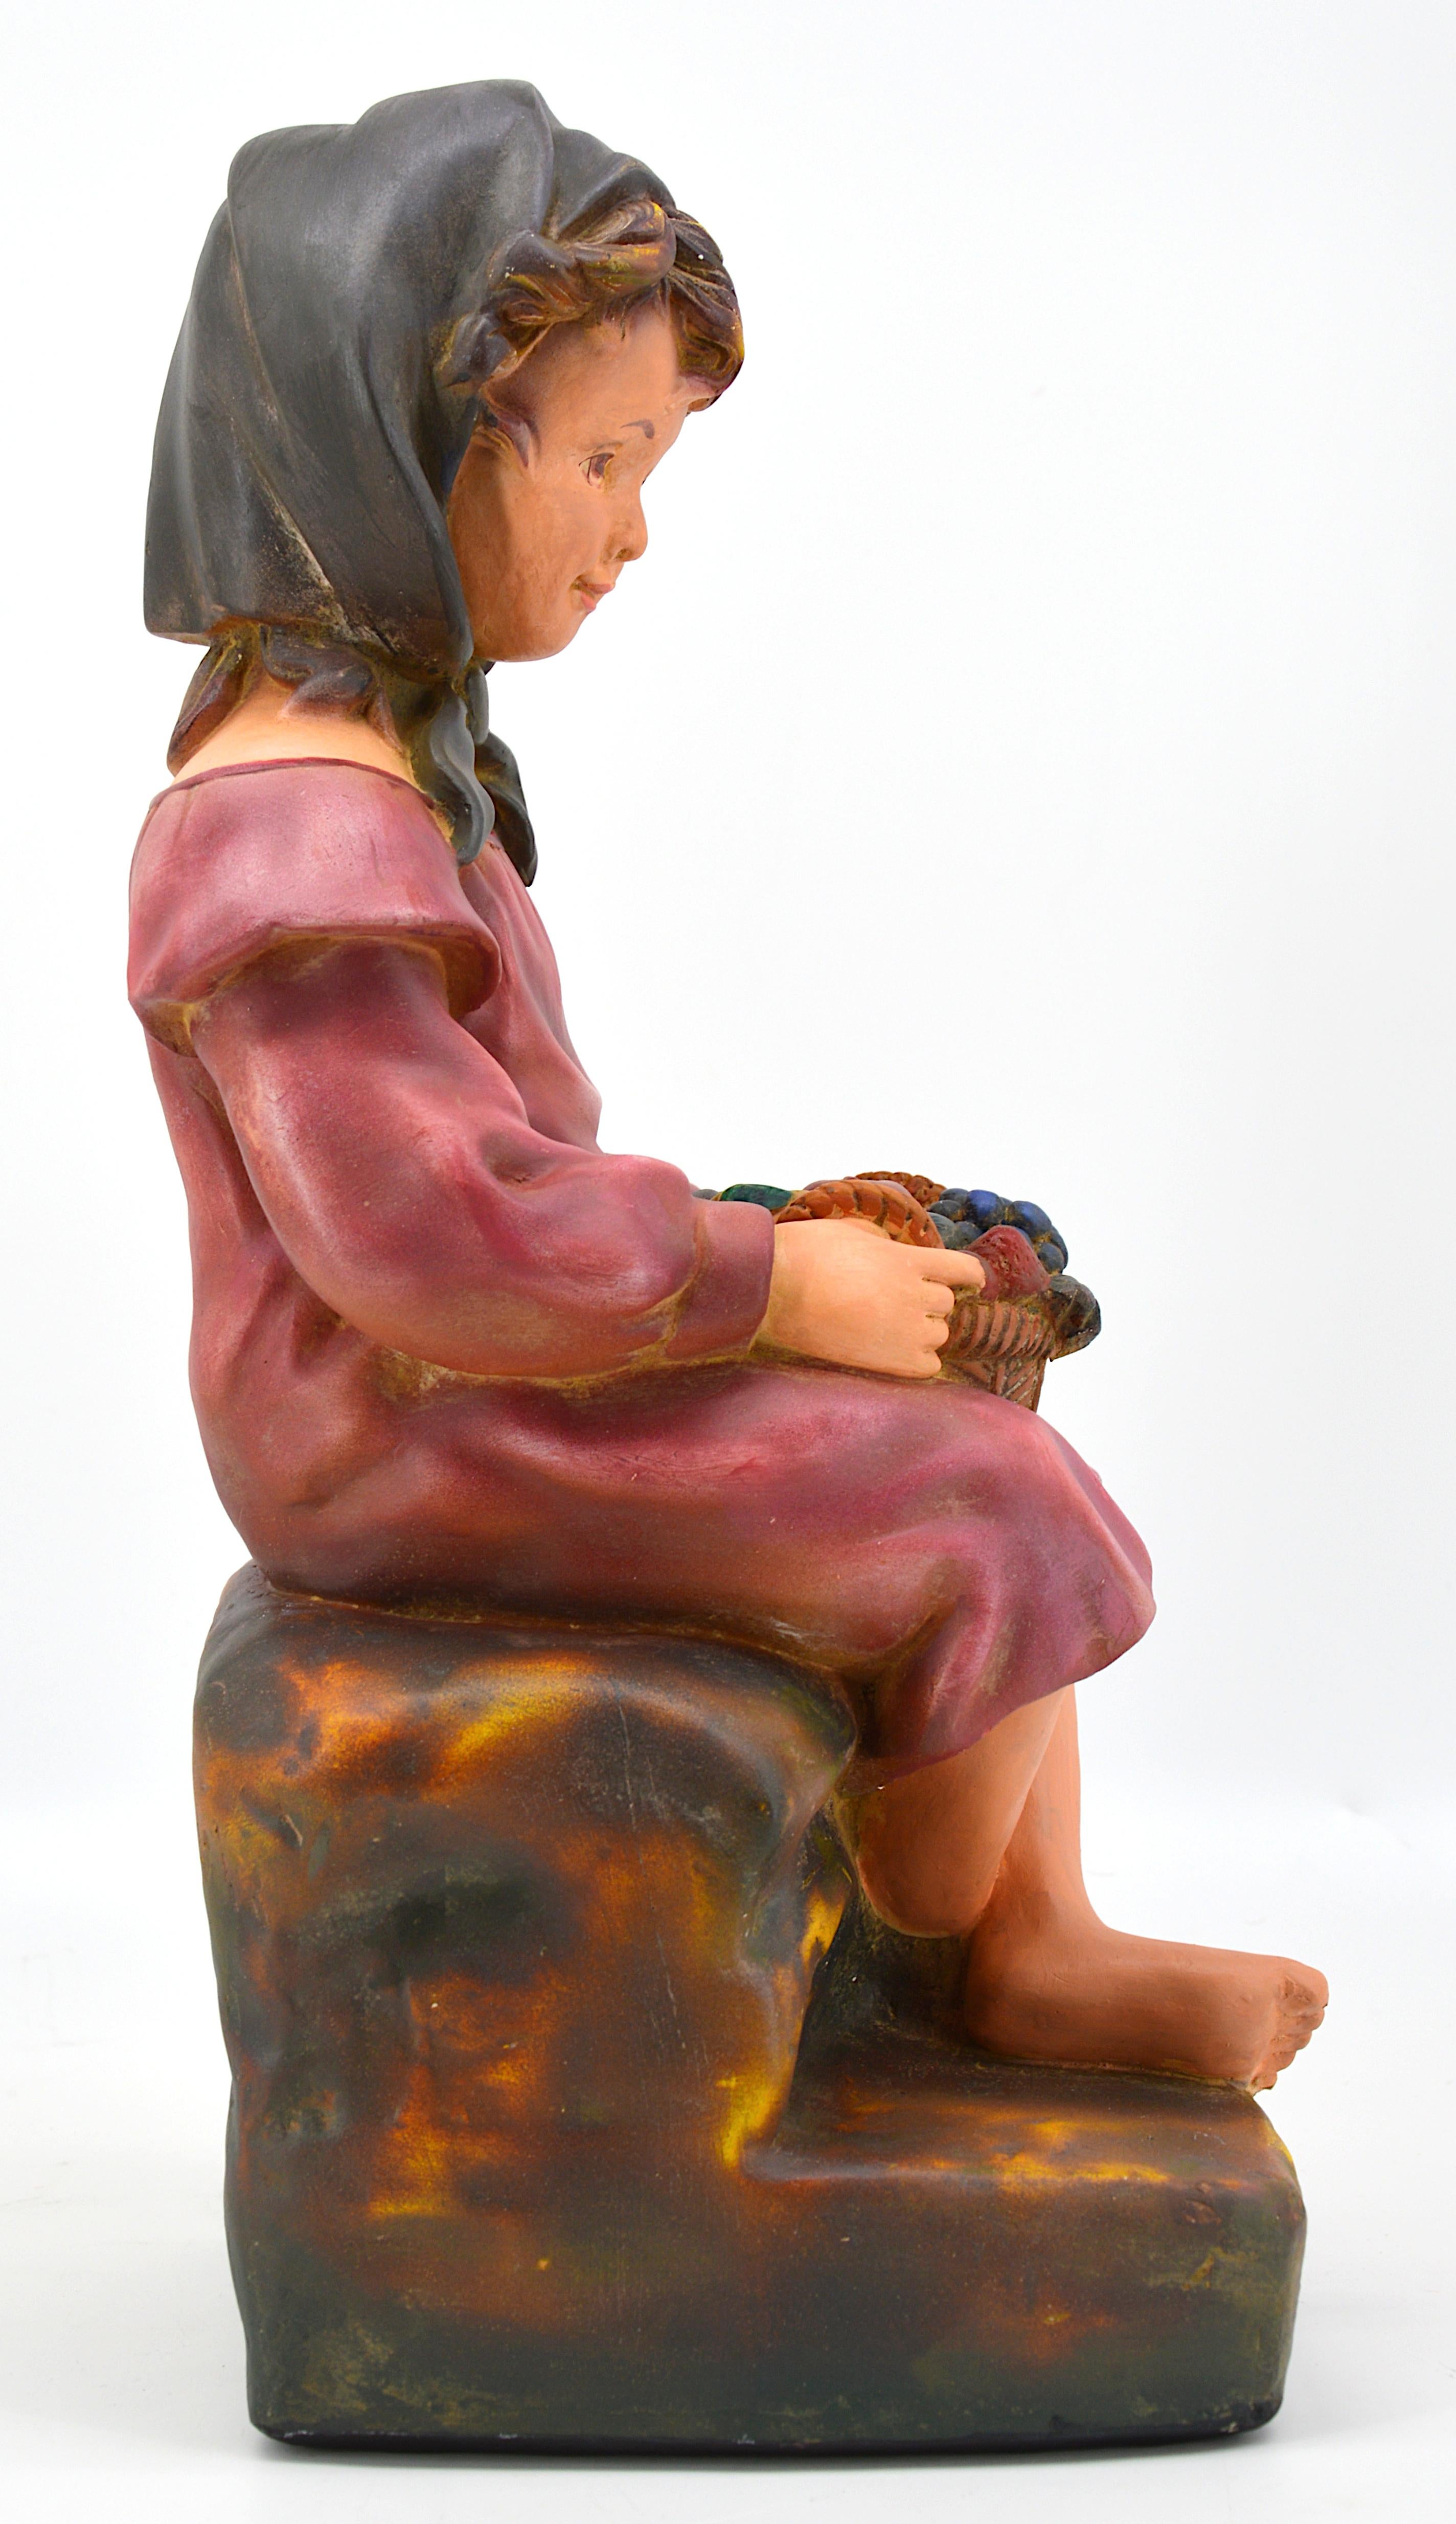 French Art Deco child sculpture, France, 1920s. Country corner - Child with a fruit basket. Polychrome plaster. Measures: height : 15.2